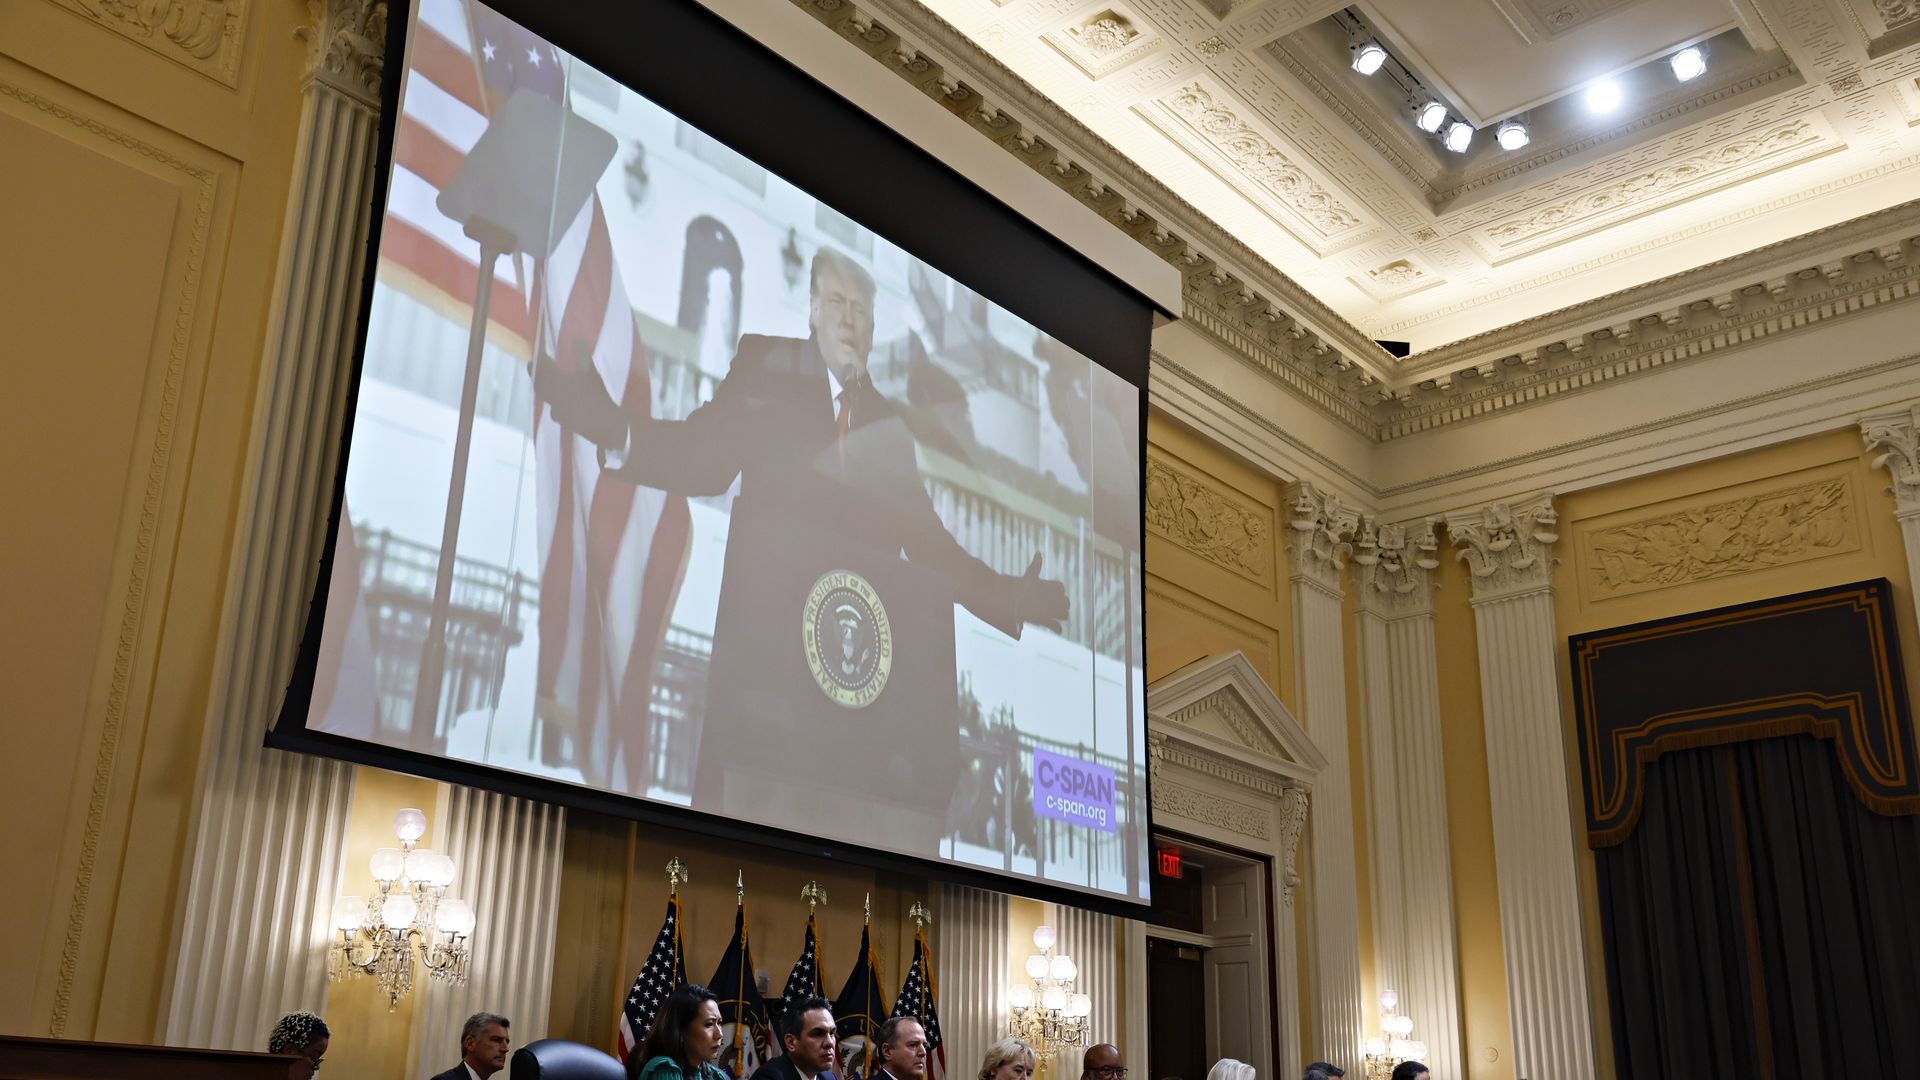 Former US President Donald Trump displayed on a screen during a hearing of the Select Committee to Investigate the January 6th Attack.